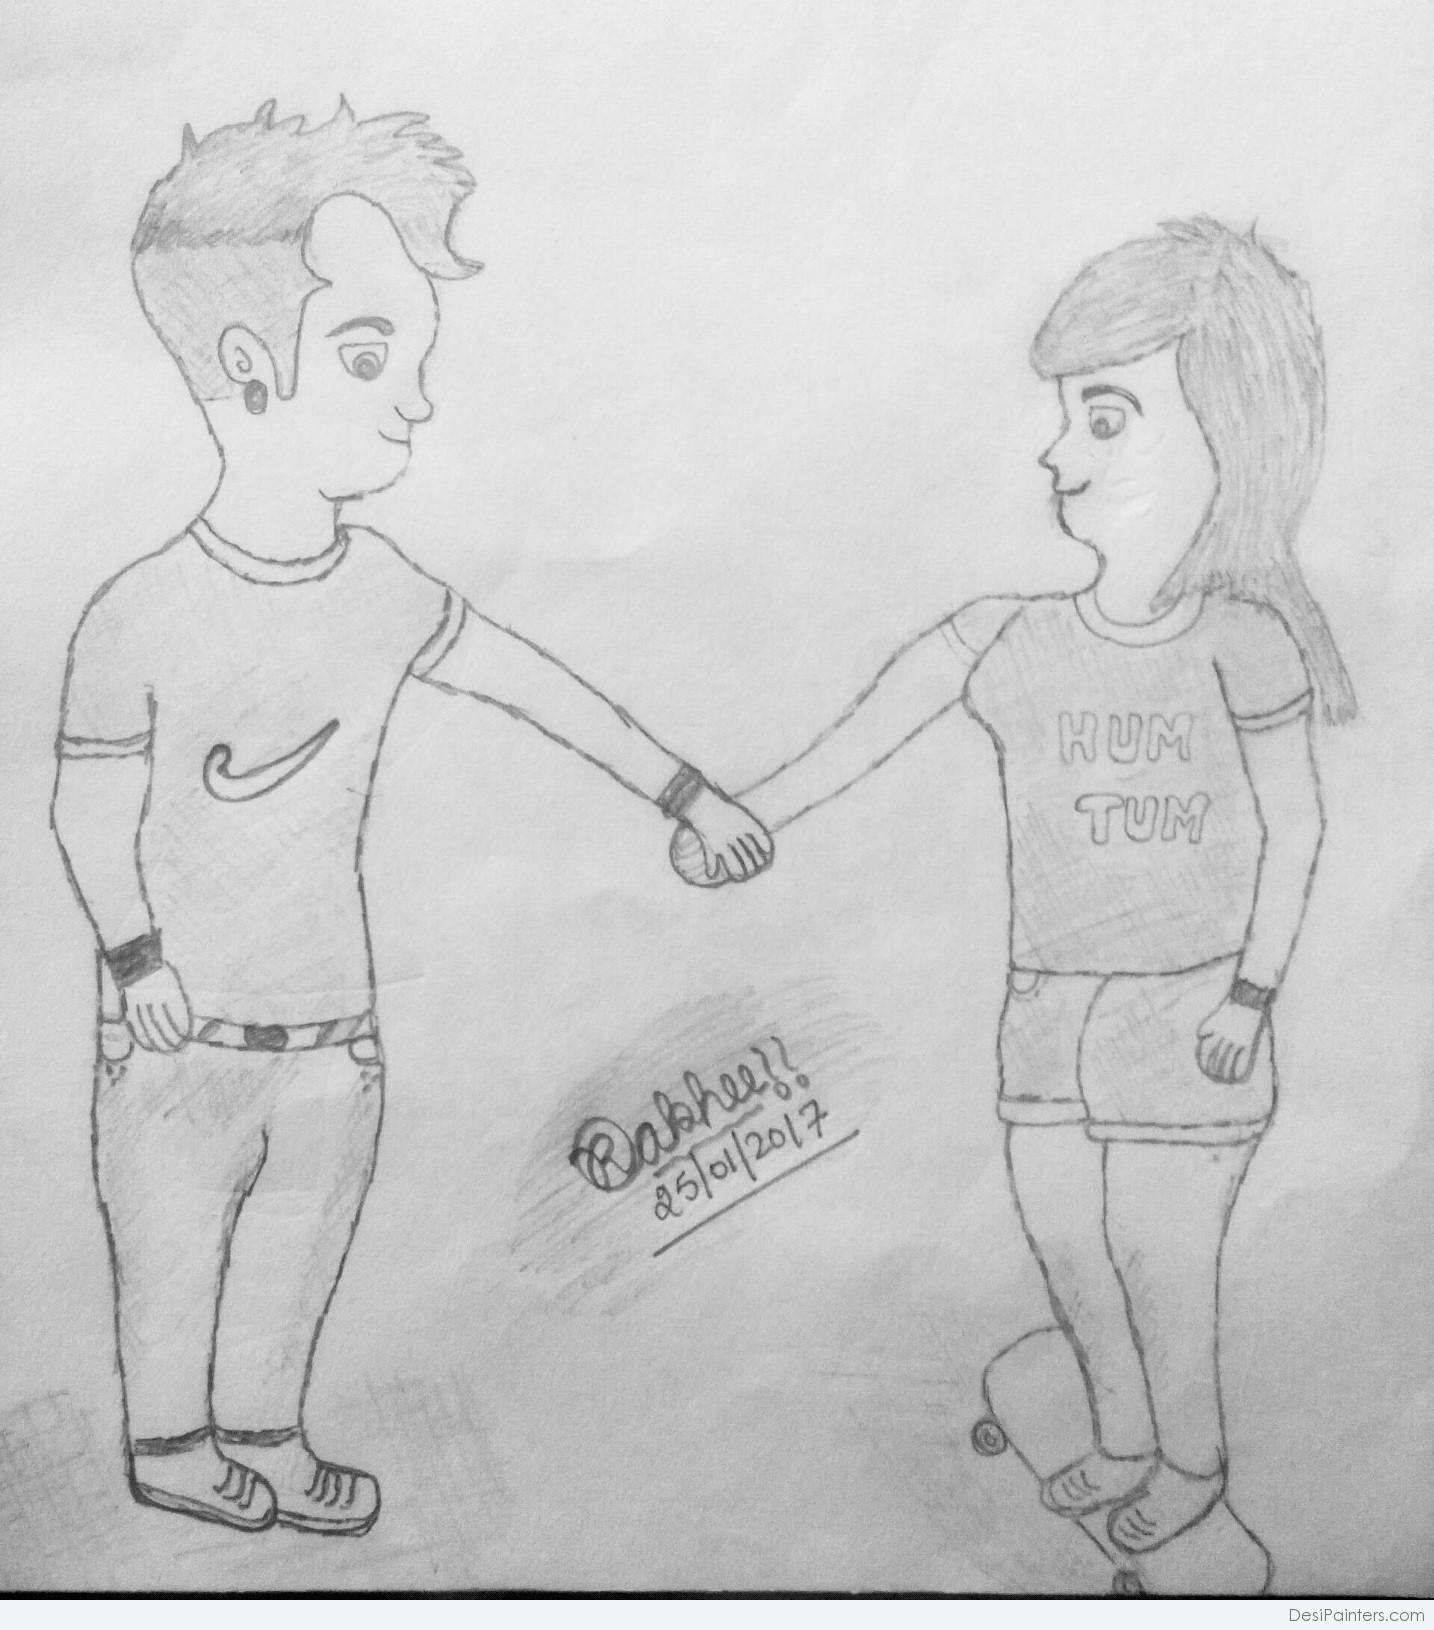 Best Friend Drawing - Etsy Canada-sonthuy.vn